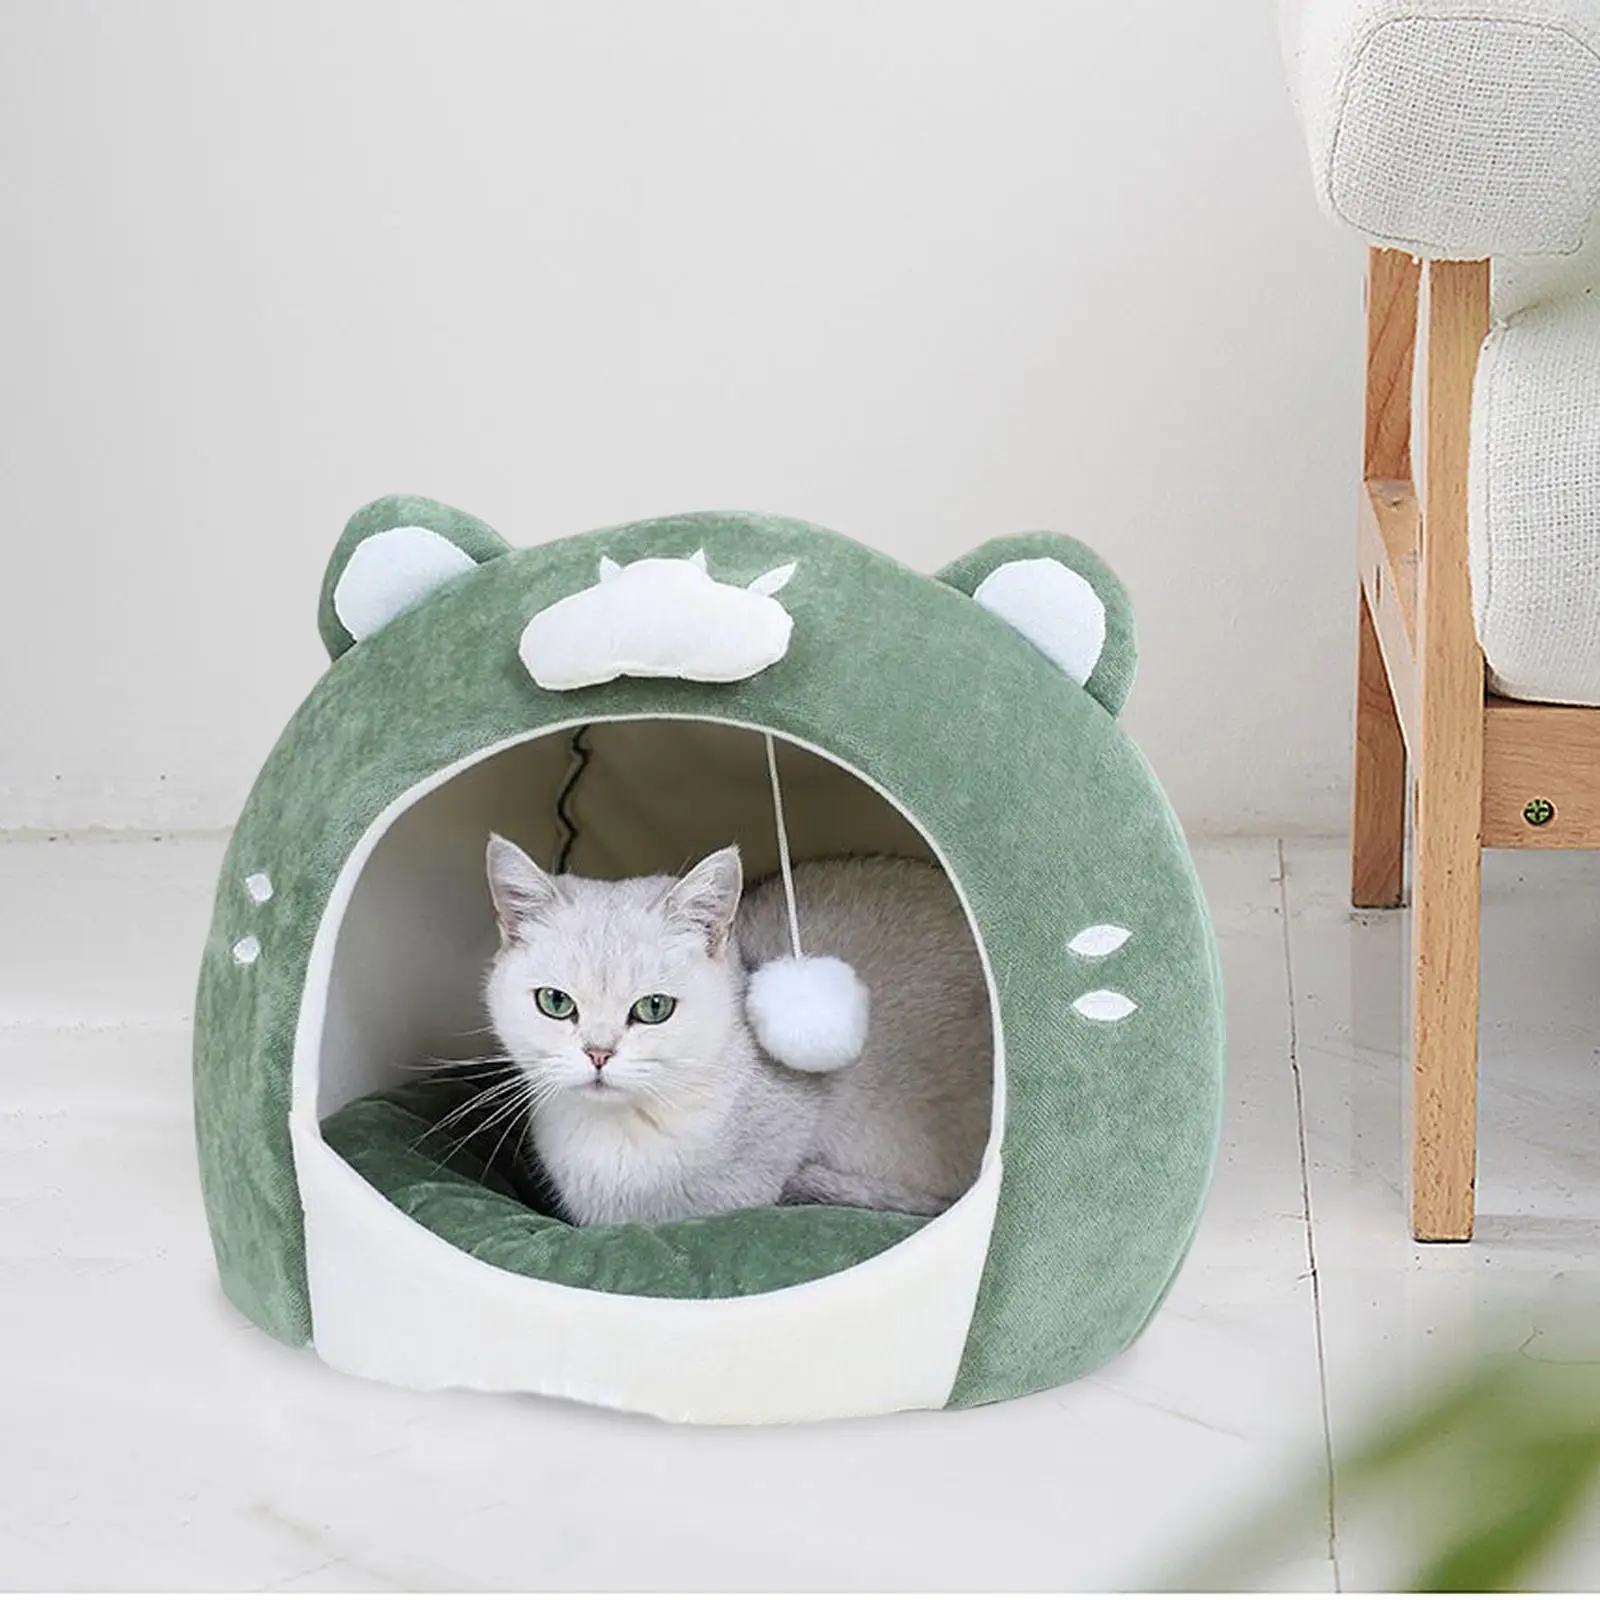 Kittens Cat Bed Covered Semi Enclosed Cat Tent Sleeping House Anti Slip Base Removable Cushion Lightweight Durable Easily Clean